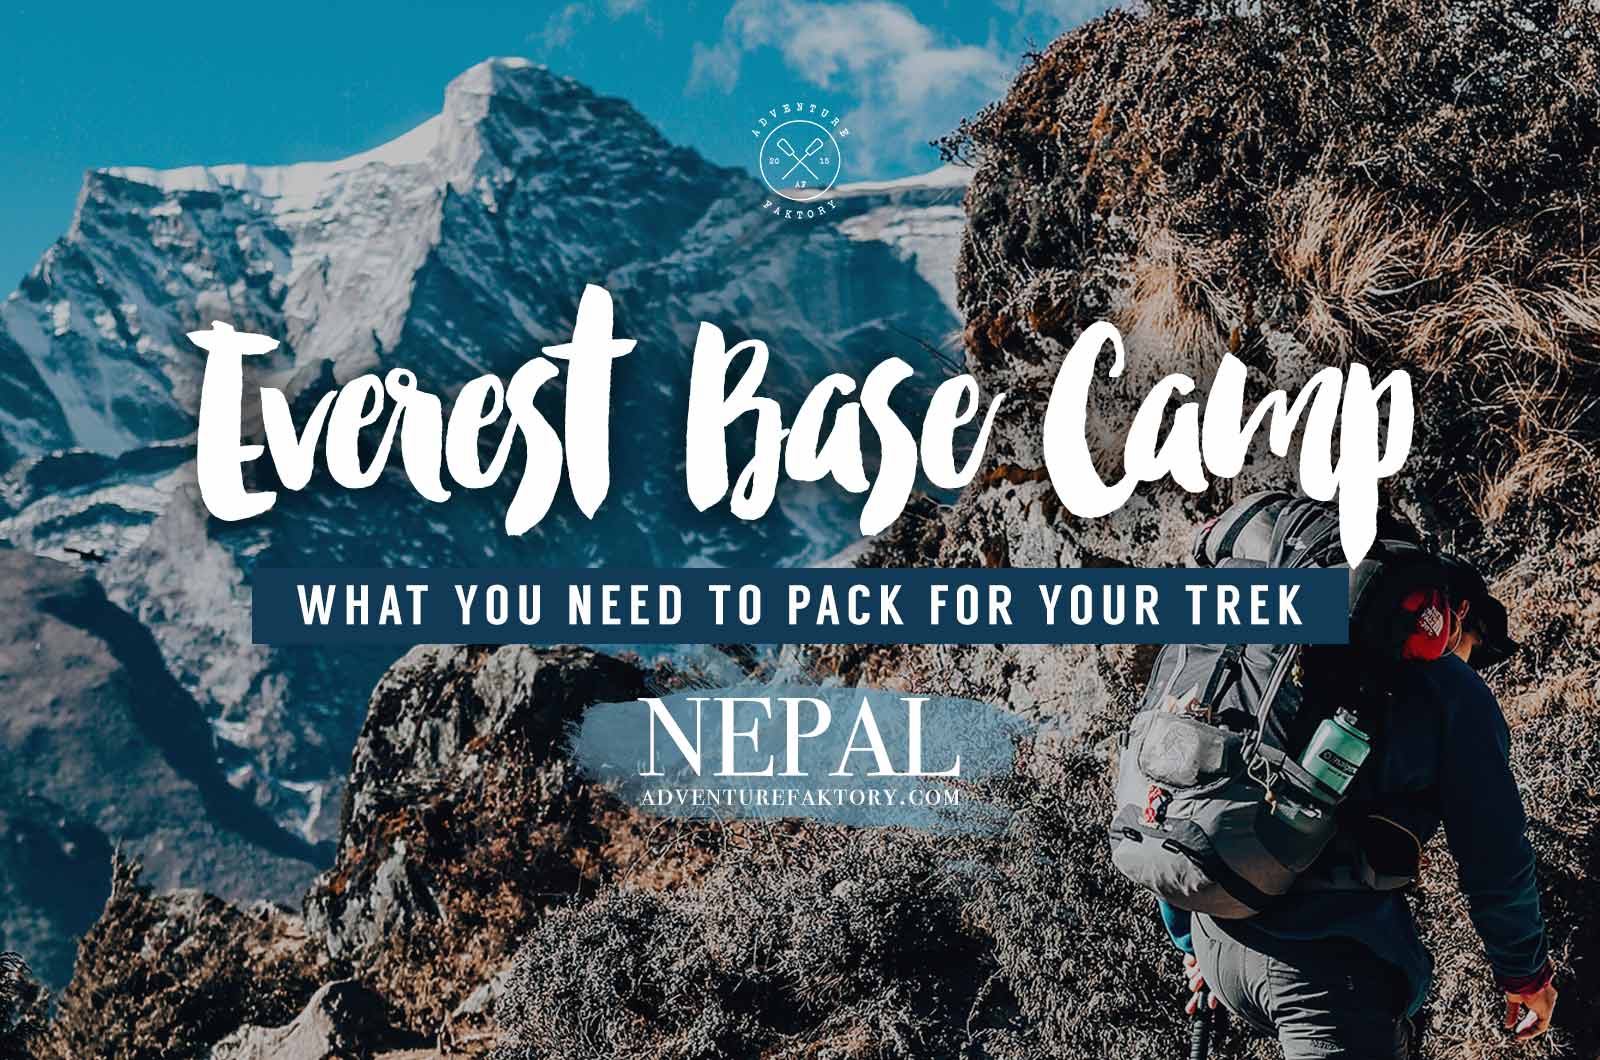 What to pack for Everest Base Camp  AdventureFaktory – An Expat Magazine  from Singapore & Dubai focused on Travel